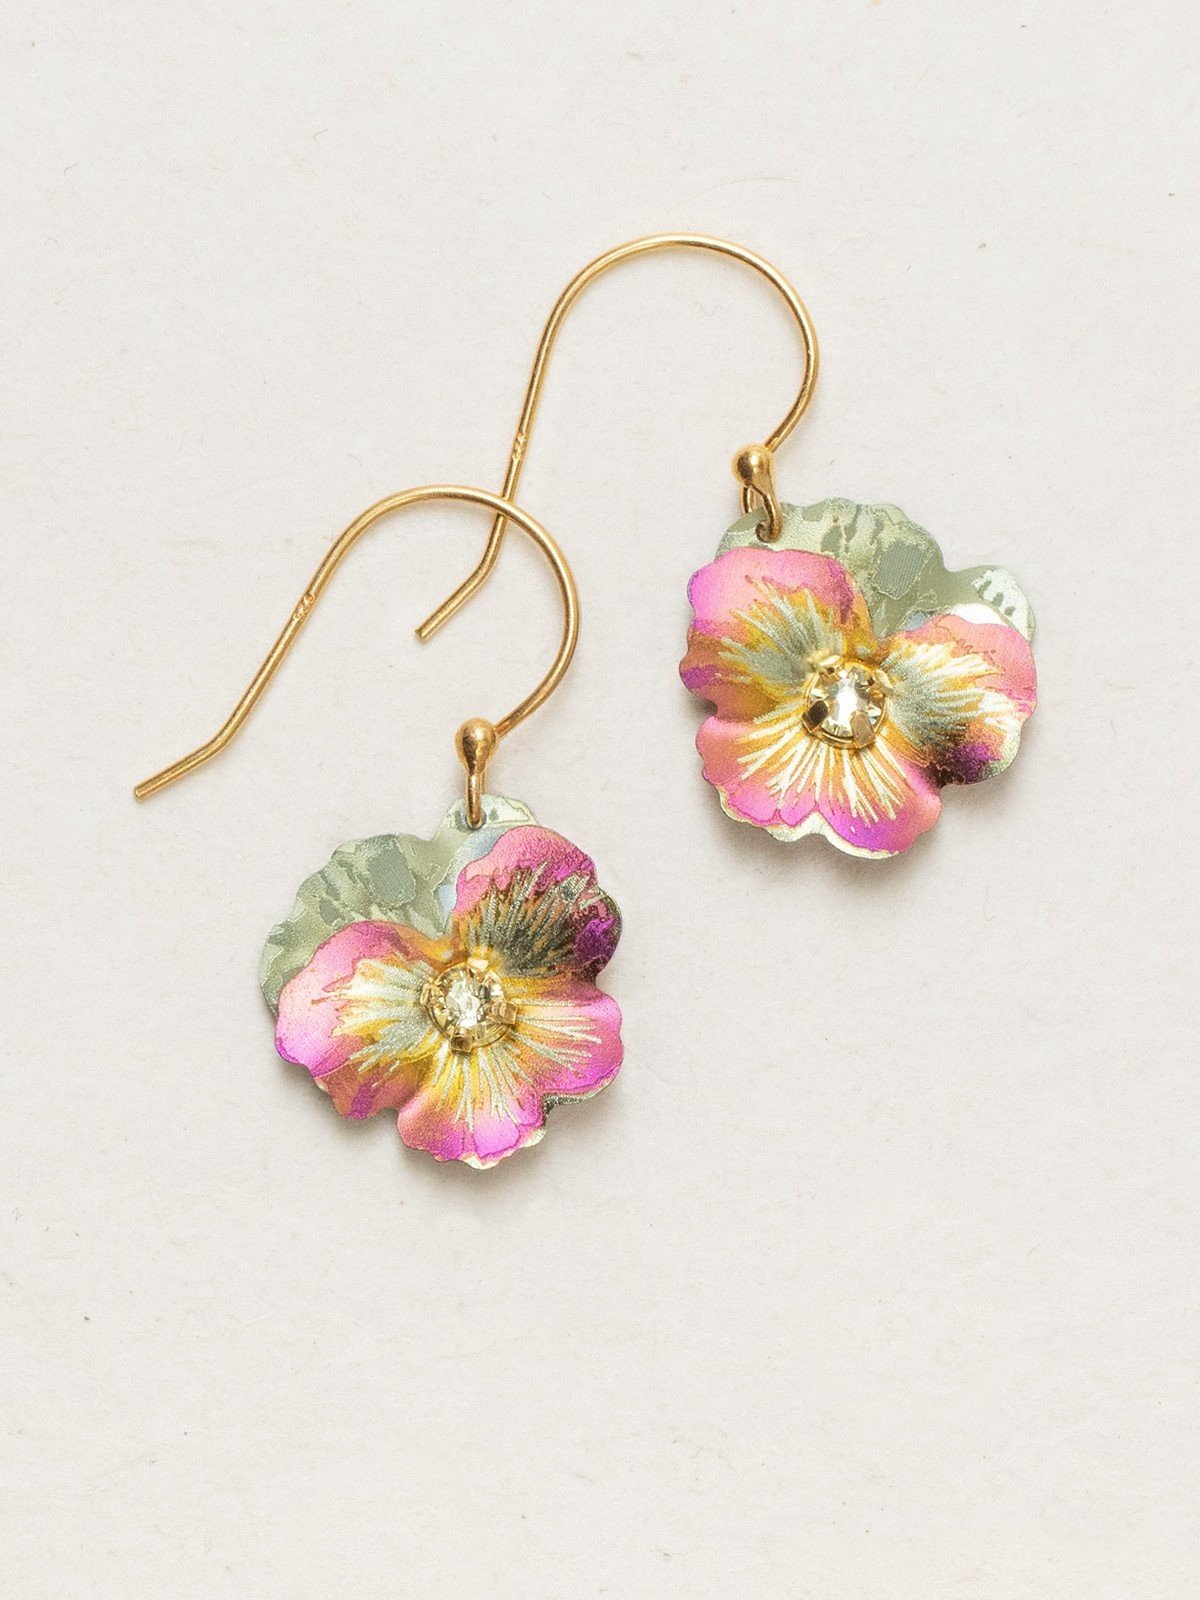 Pansy earrings by Holly Yashi in apricot color